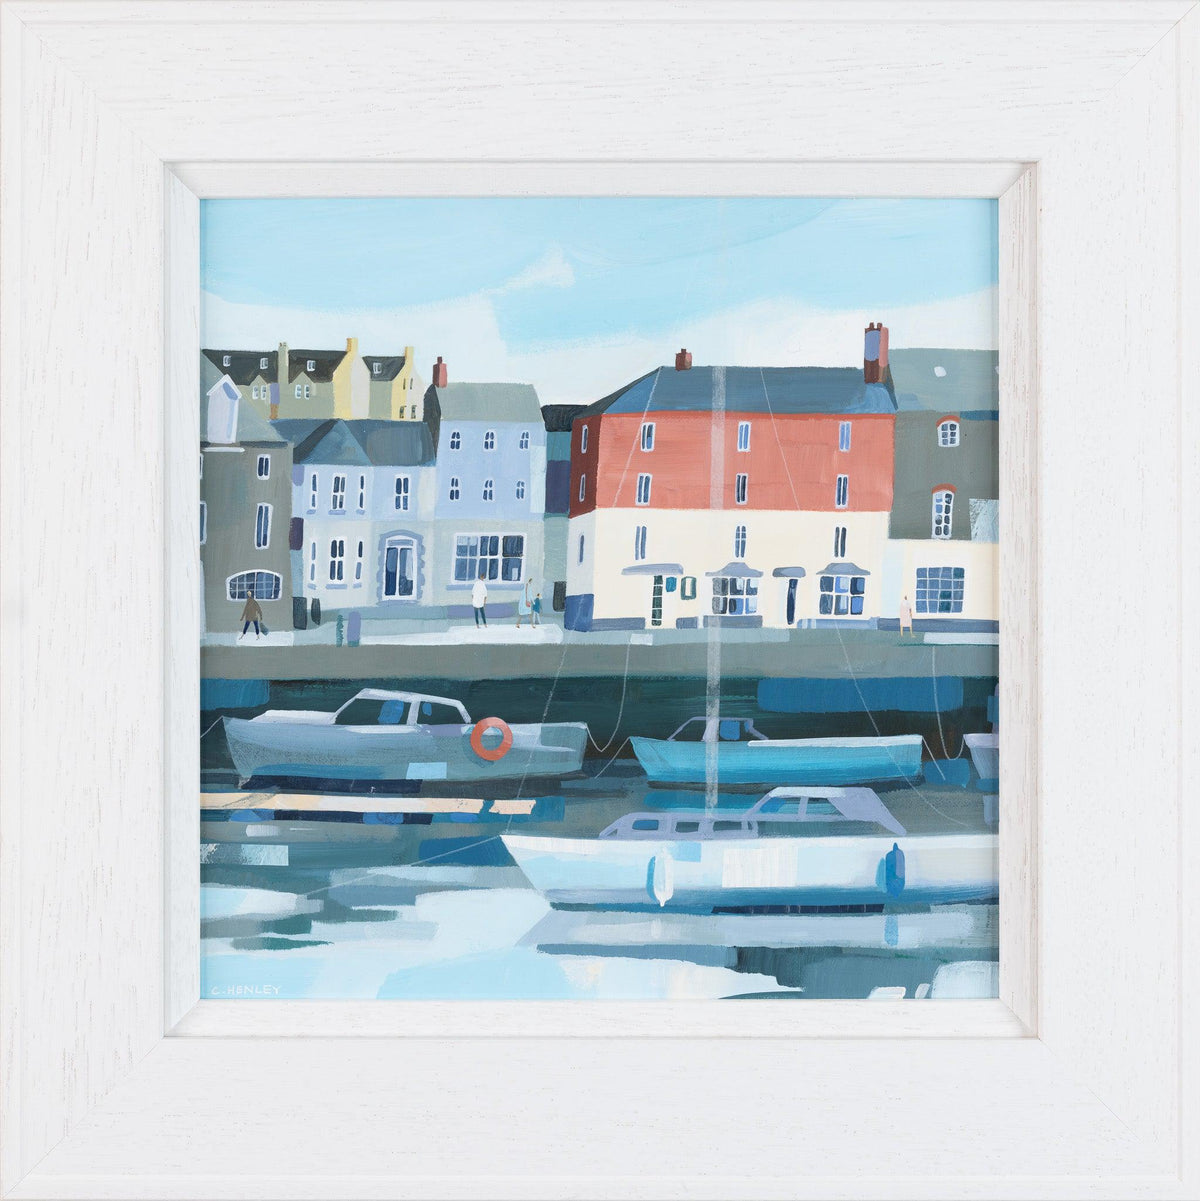 &#39;Padstow South Quay&#39; a mixed media original by Claire Henley, available at Padstow Gallery, Cornwall